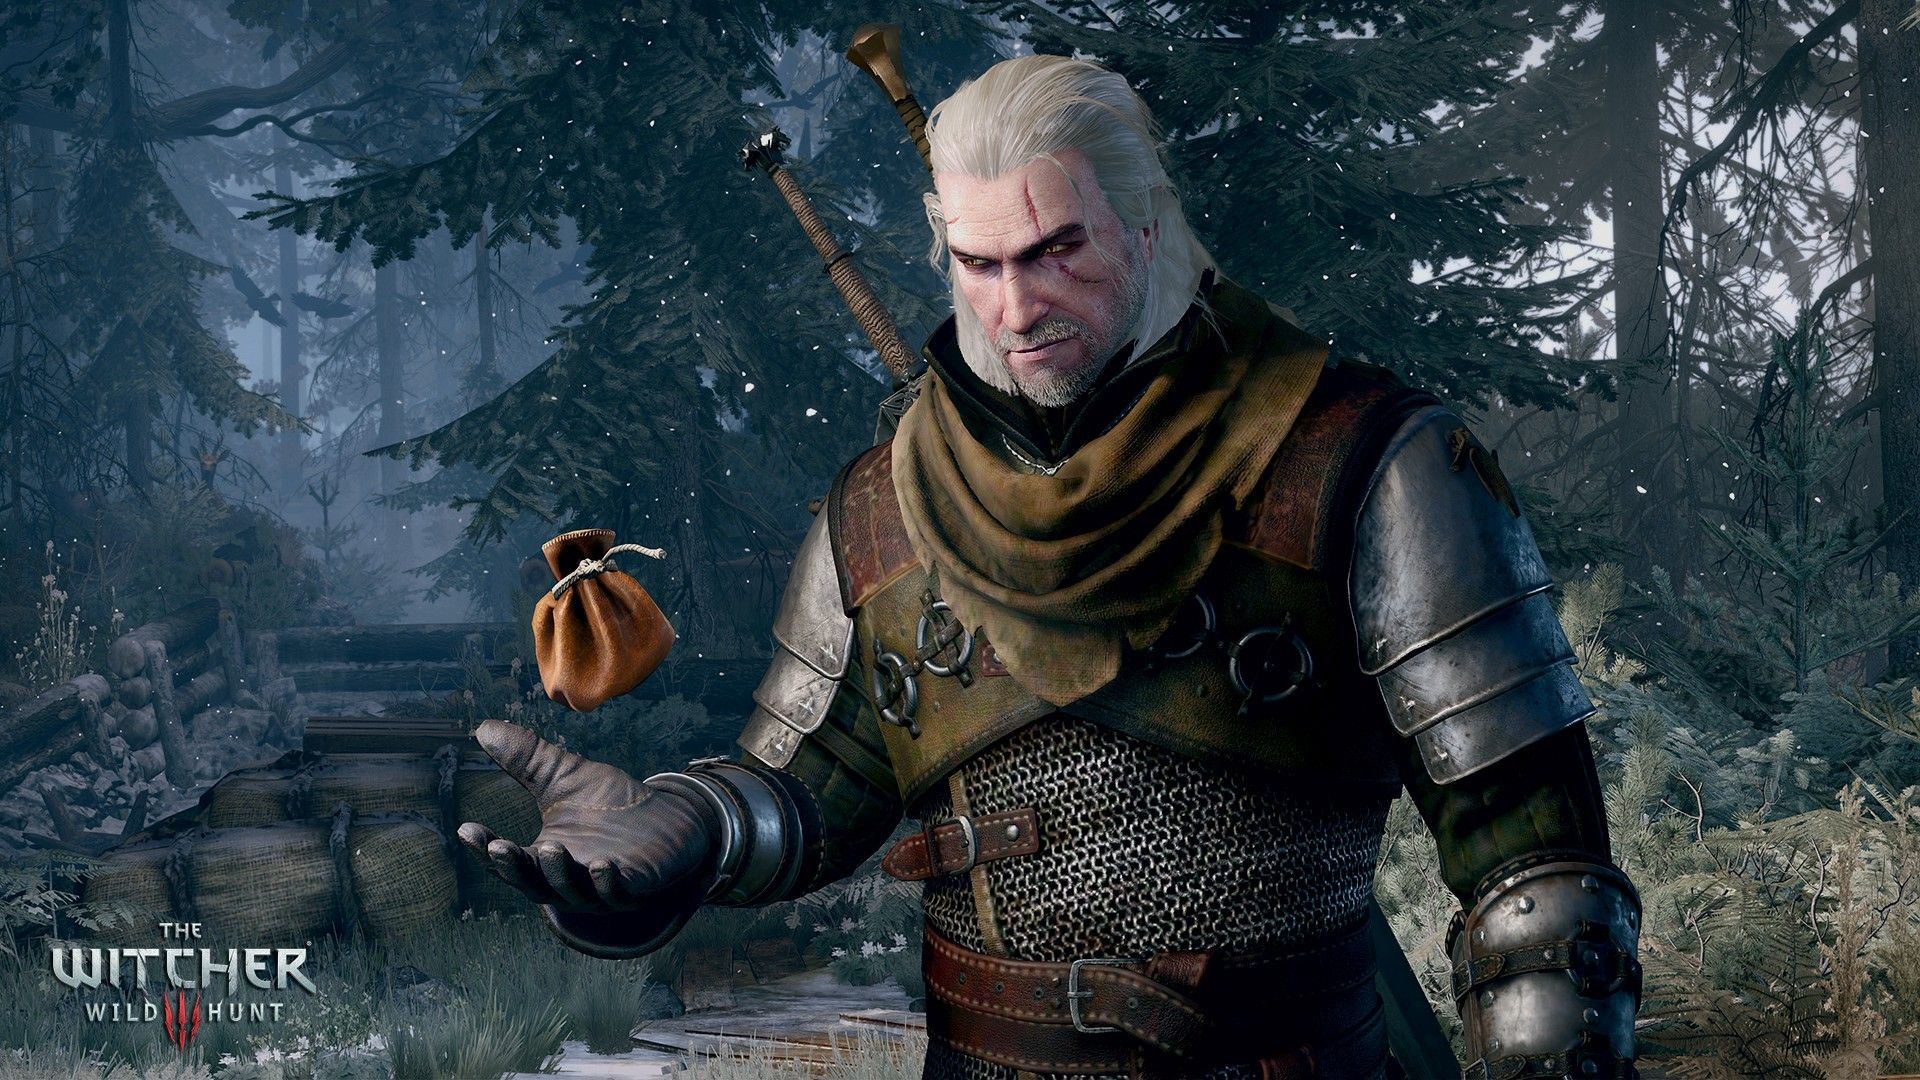 Geralt money bag rich 5,000 crowns every all rewards Gaunter O'Dimm The Witcher 3 Heart of Stone